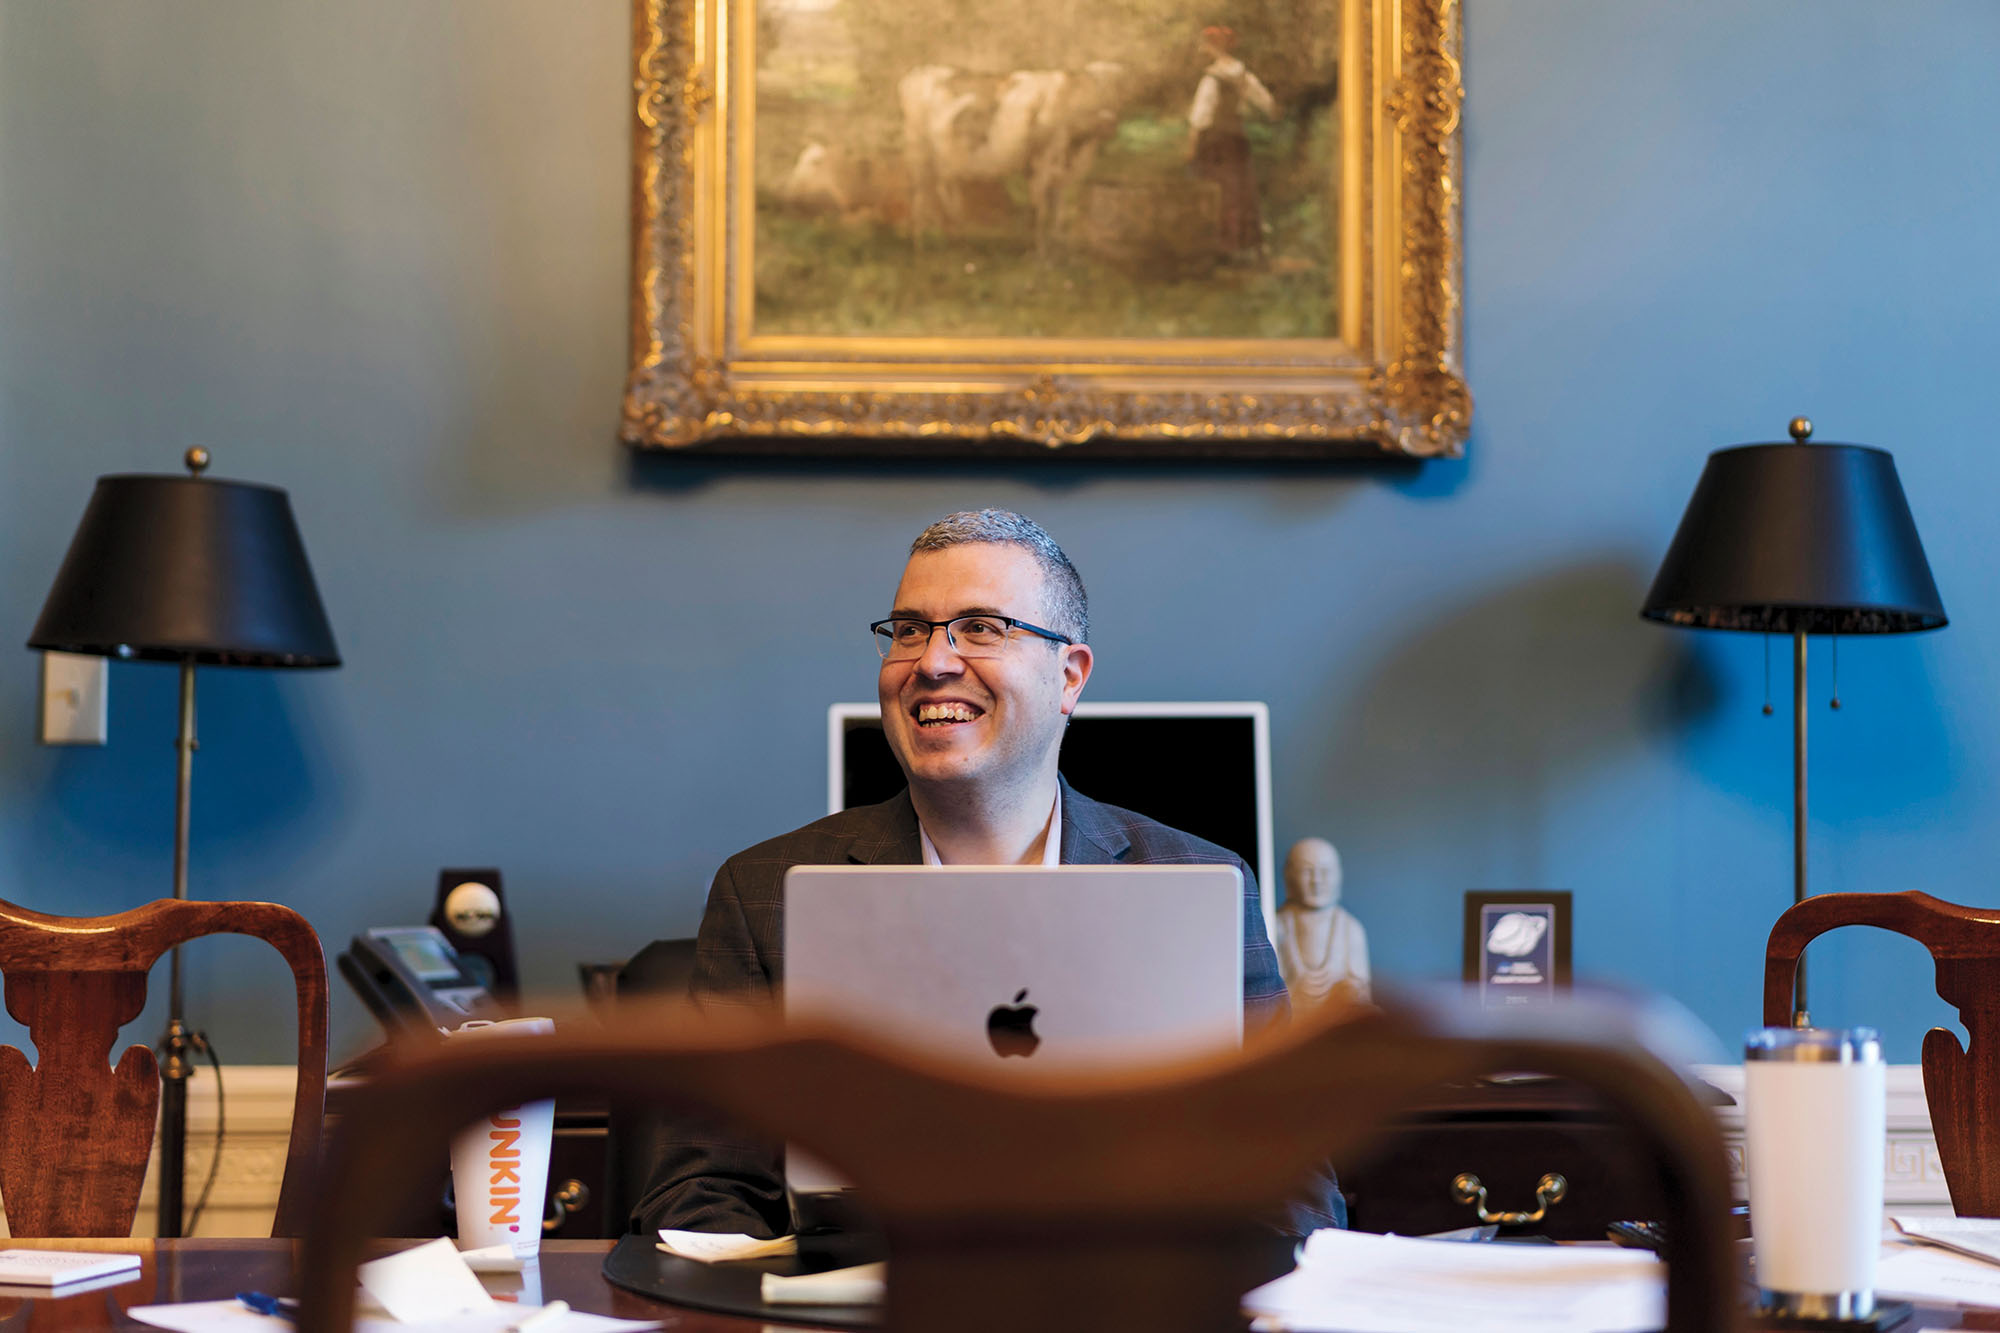 A man wearing glasses and suit sits in a well-appointed office at a desk, behind a laptop computer and smiles.